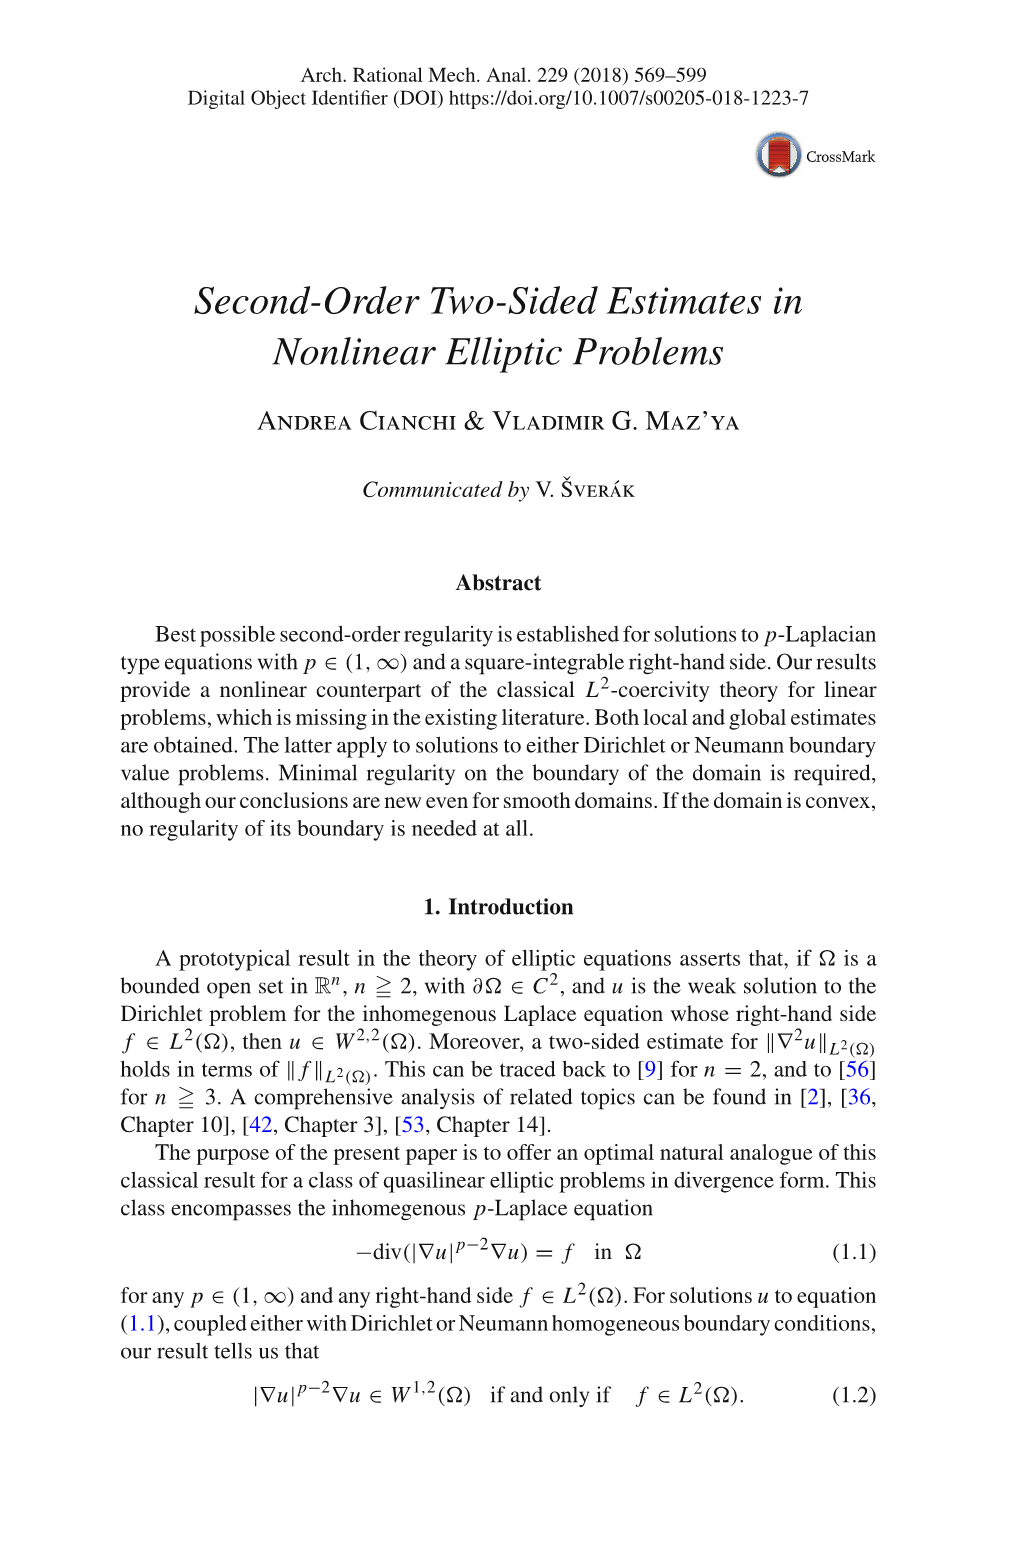 Second-Order Two-Sided Estimates in Nonlinear Elliptic Problems